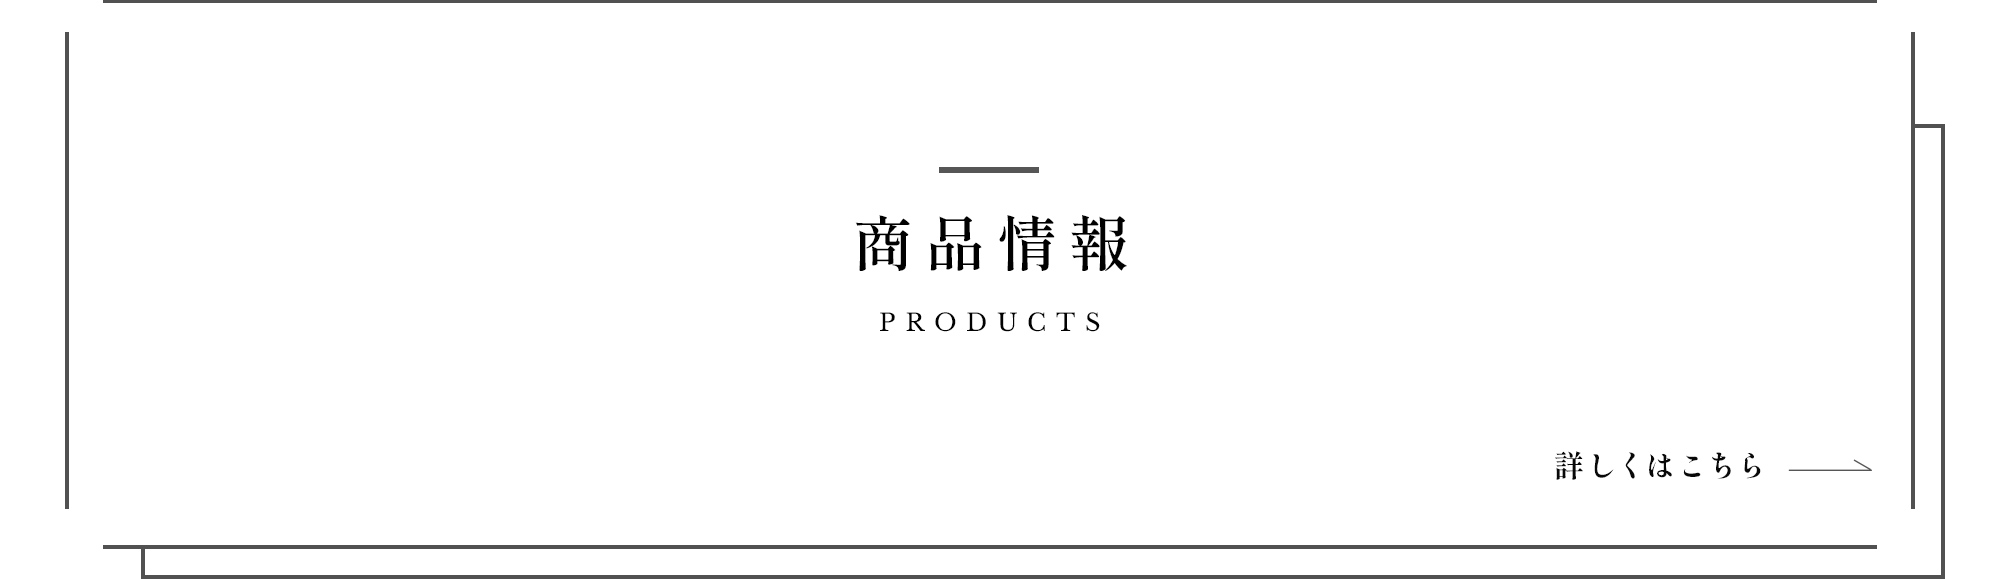 products_banner